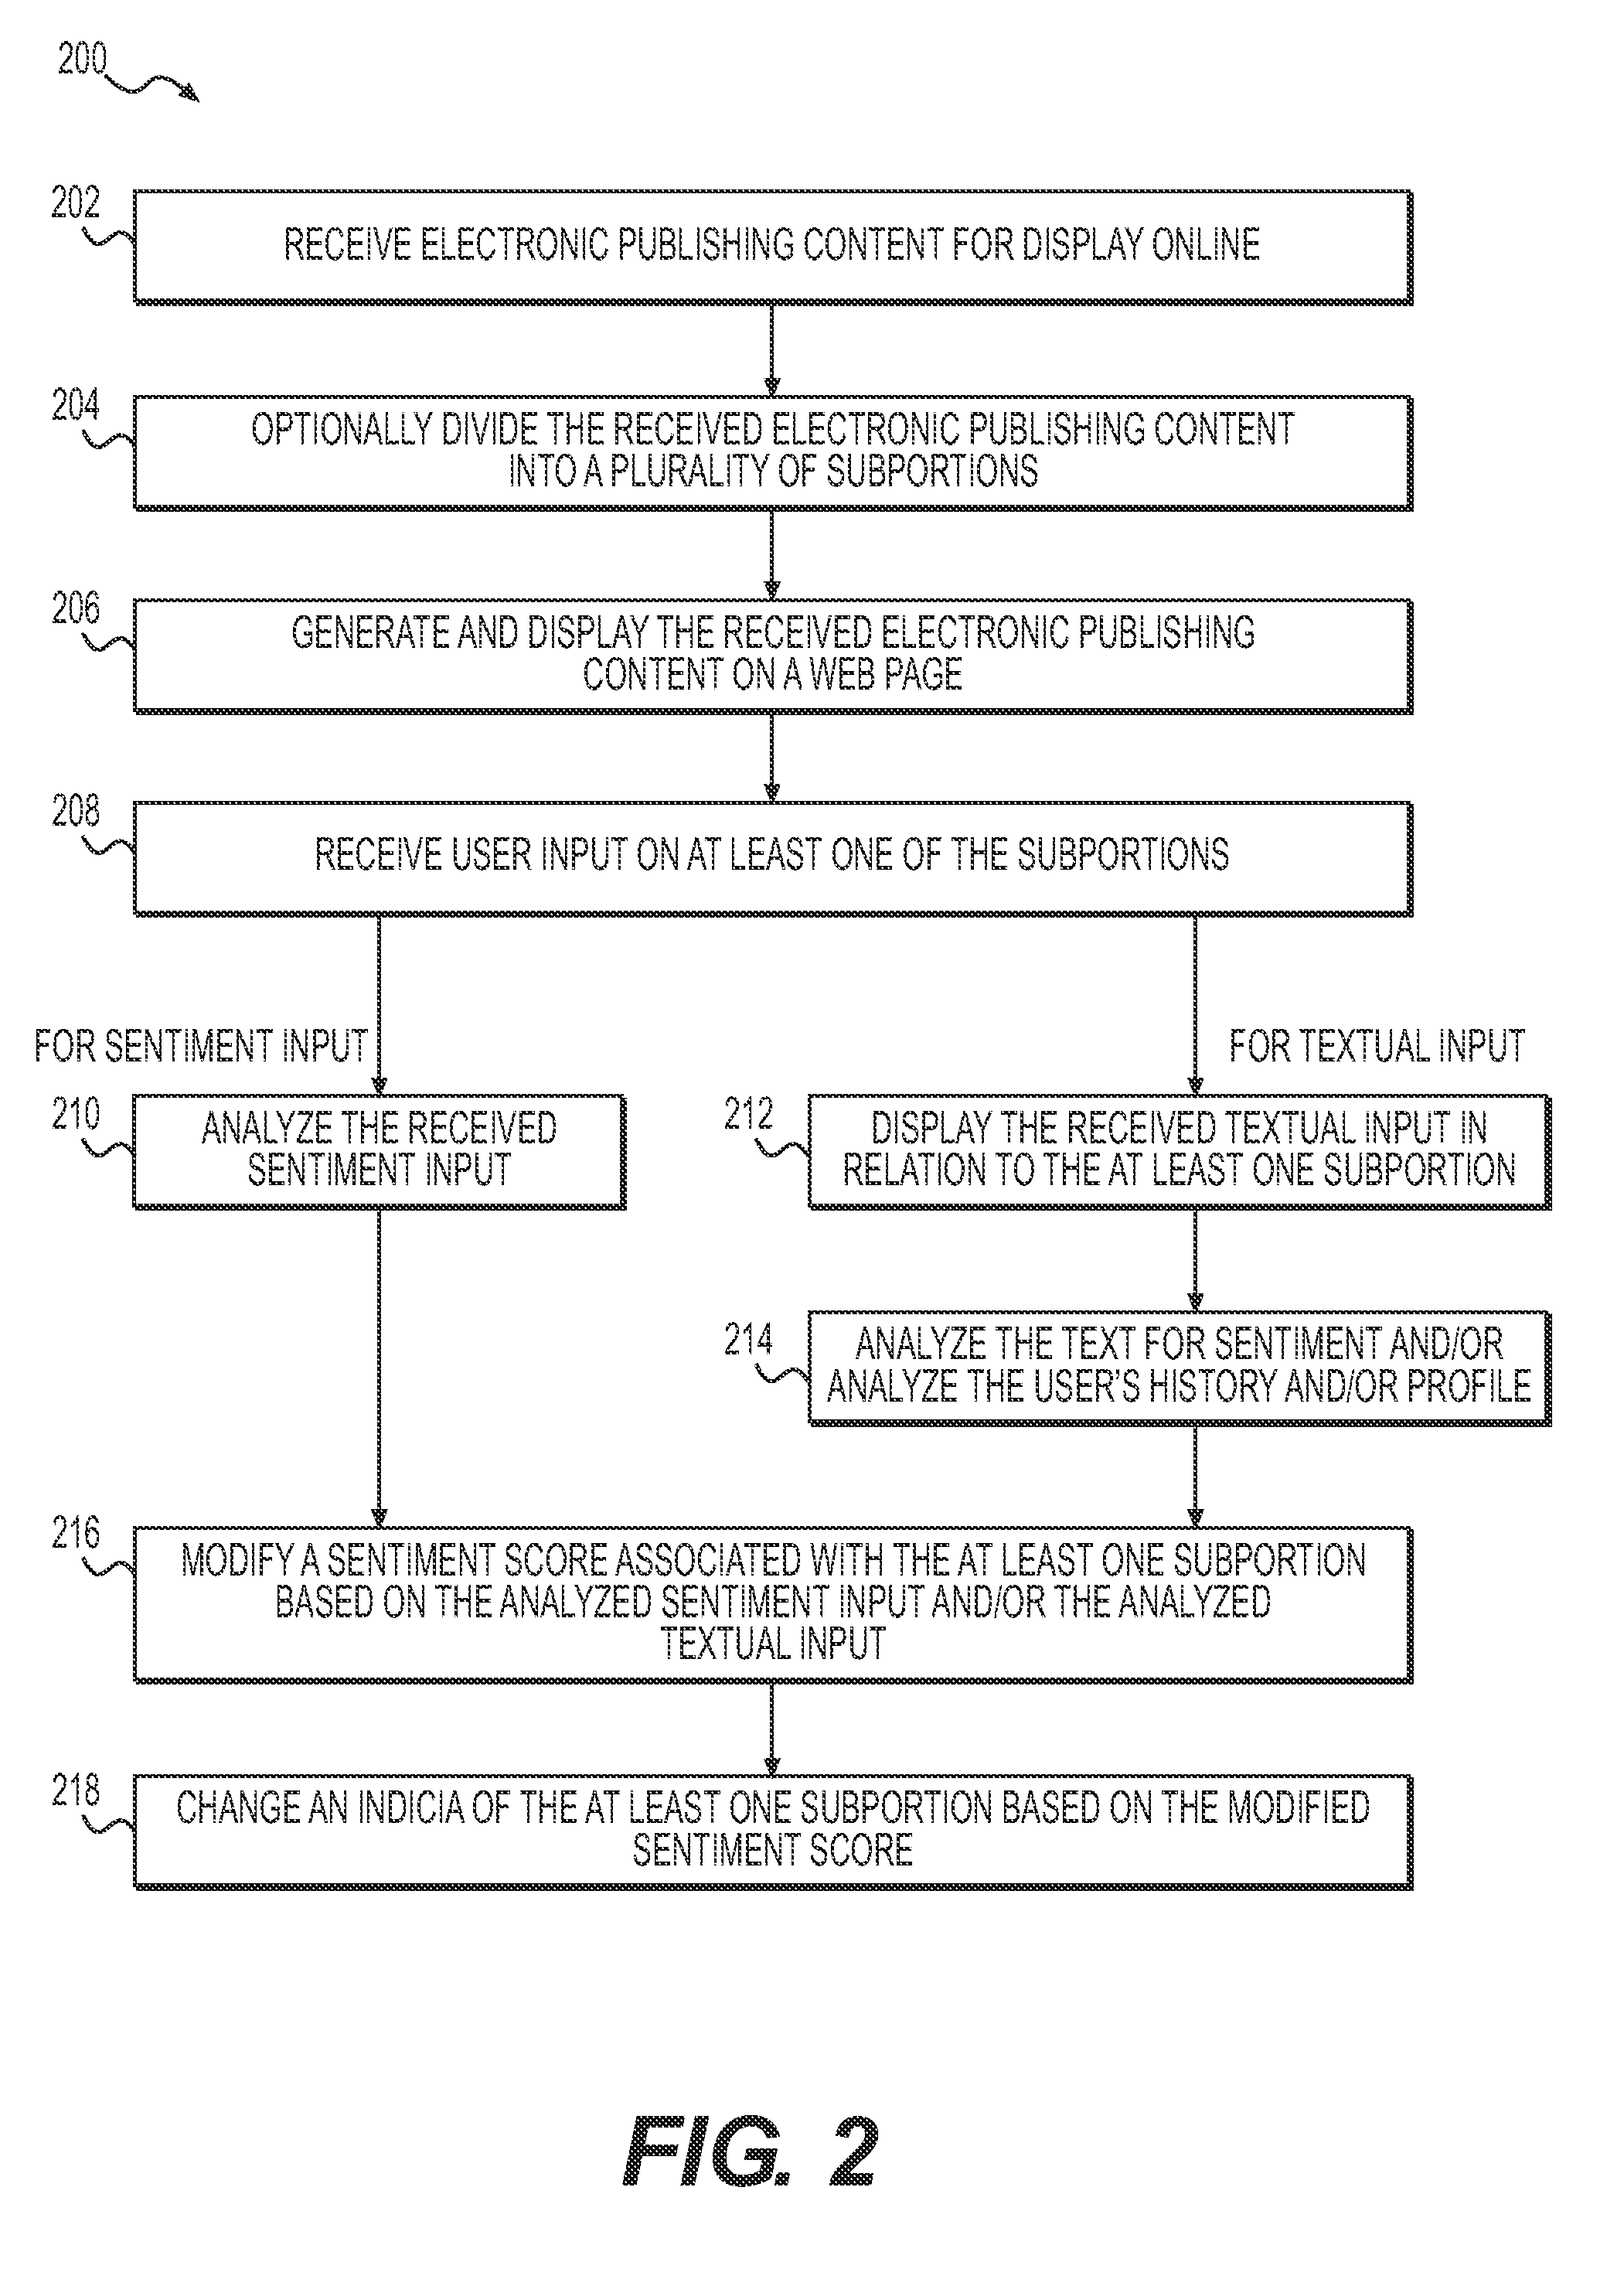 Systems and methods for categorizing, evaluating, and displaying user input with publishing content